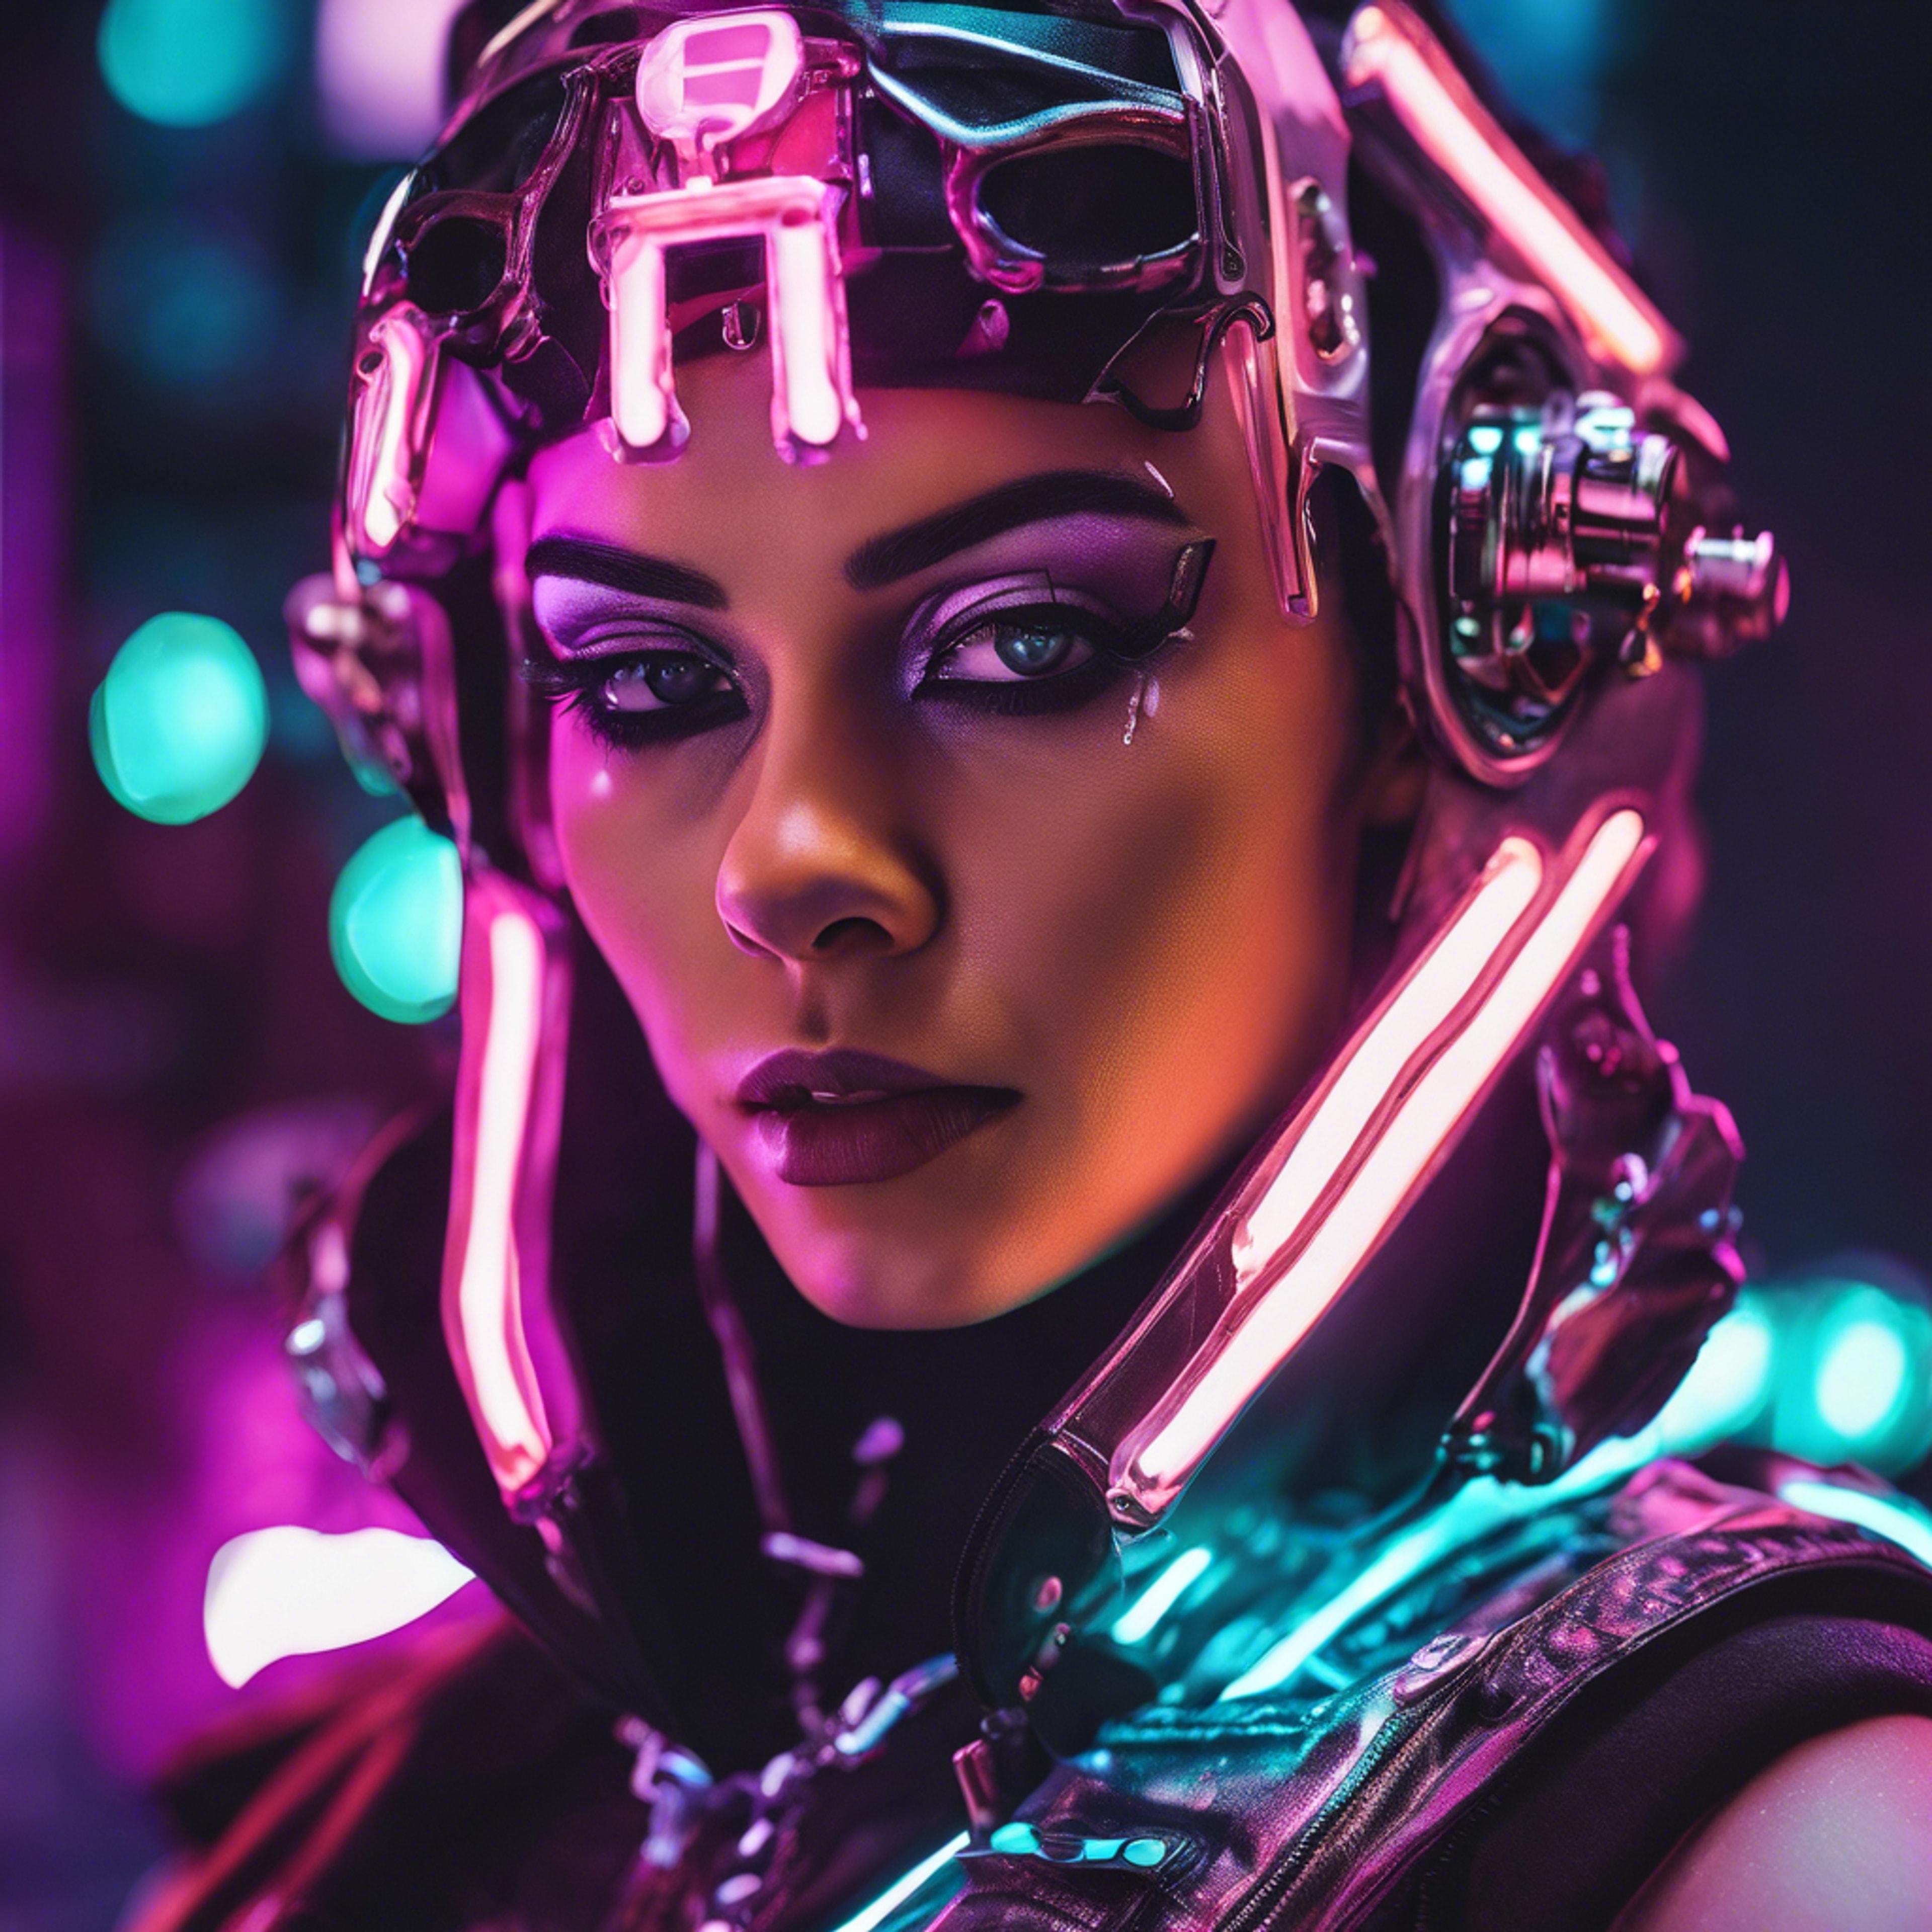 A close-up portrait of a cyberpunk baddie in neon lighting, metal piercings, and sci-fi-inspired makeup. Tapet[9ac0123c92044077bebc]